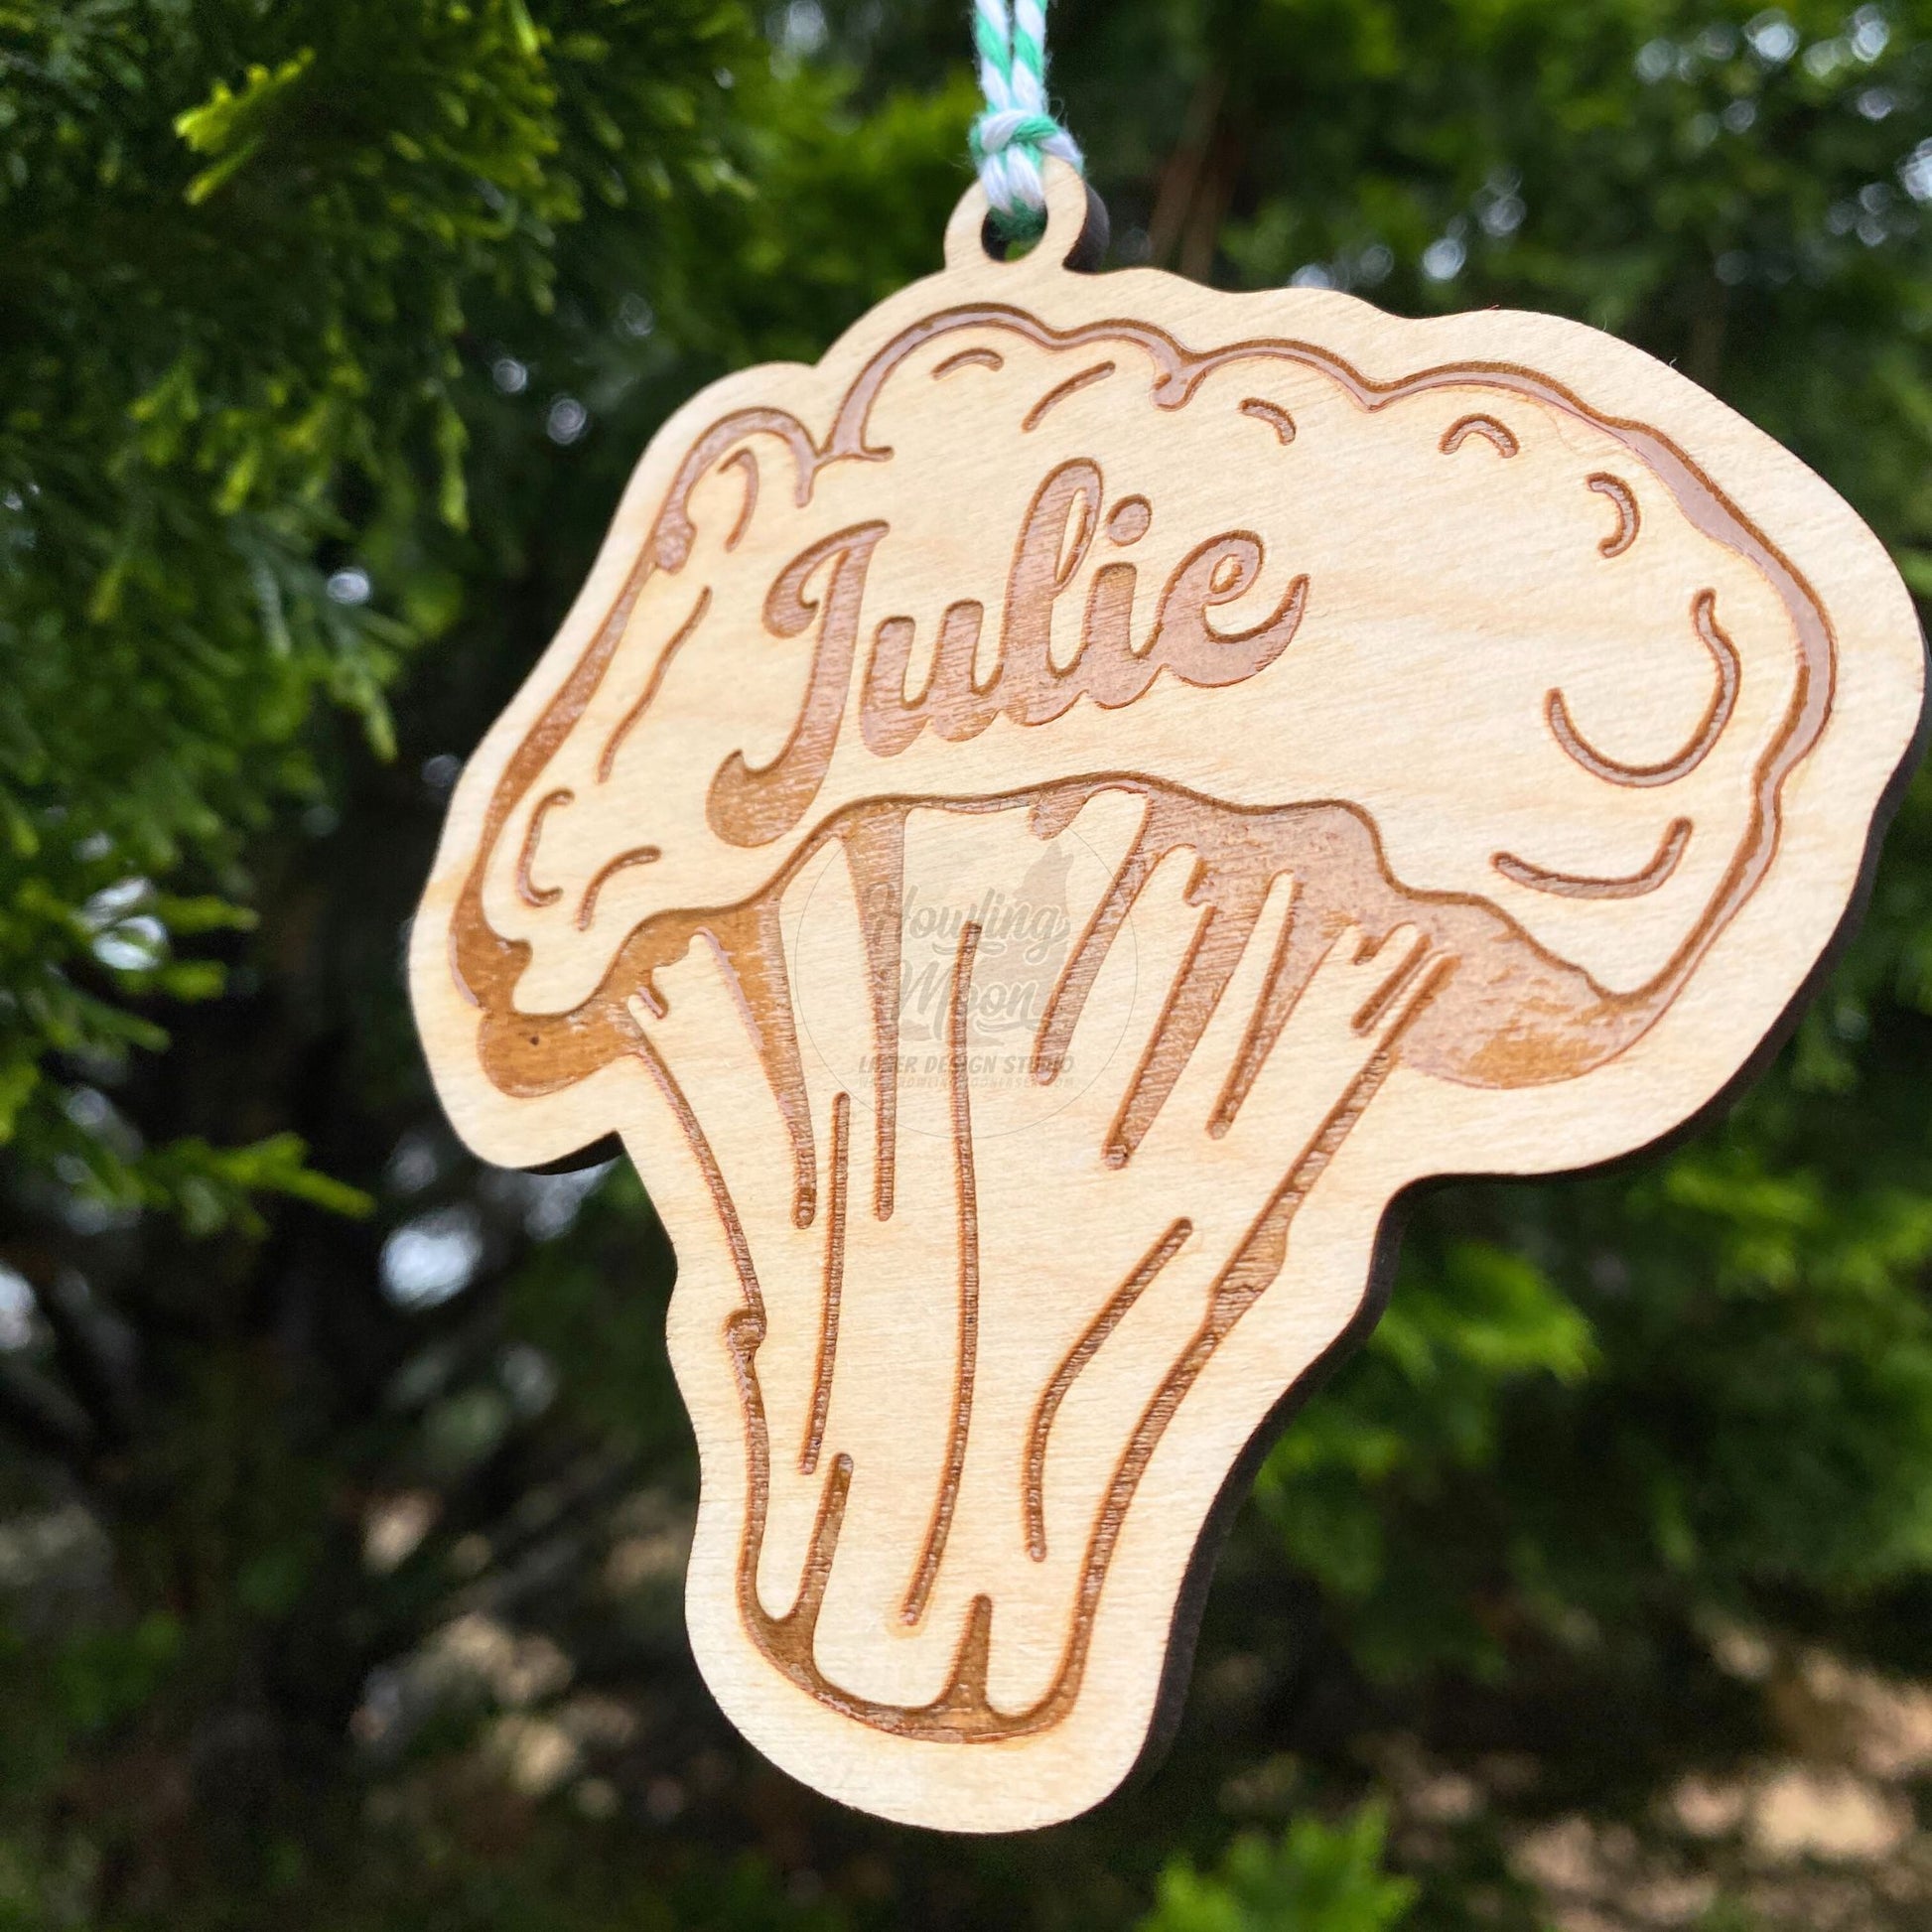 Right side view of Personalized broccoli ornament made of natural wood hanging from a tree - made by Howling Moon Laser Design Studio in Virginia, USA